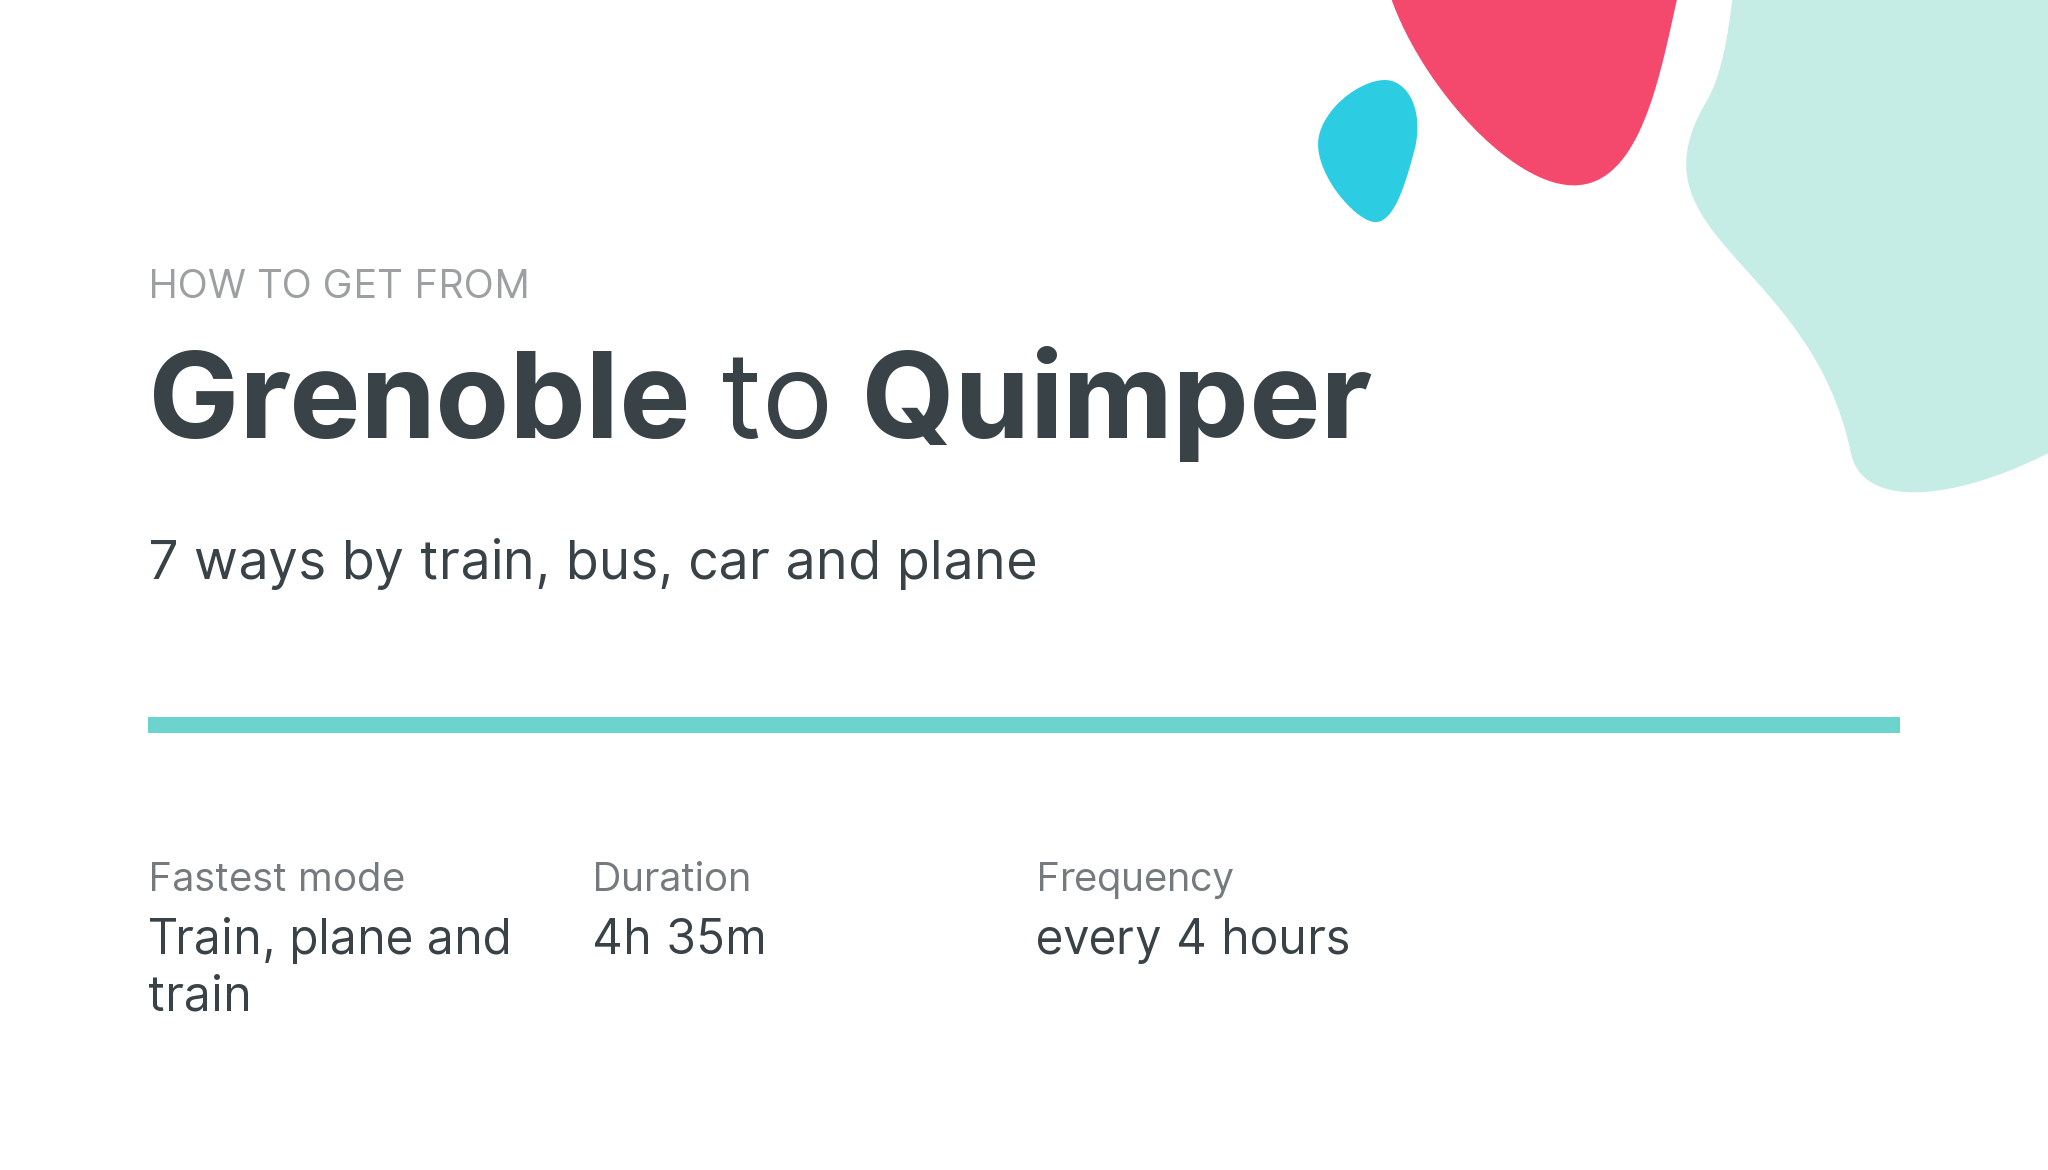 How do I get from Grenoble to Quimper